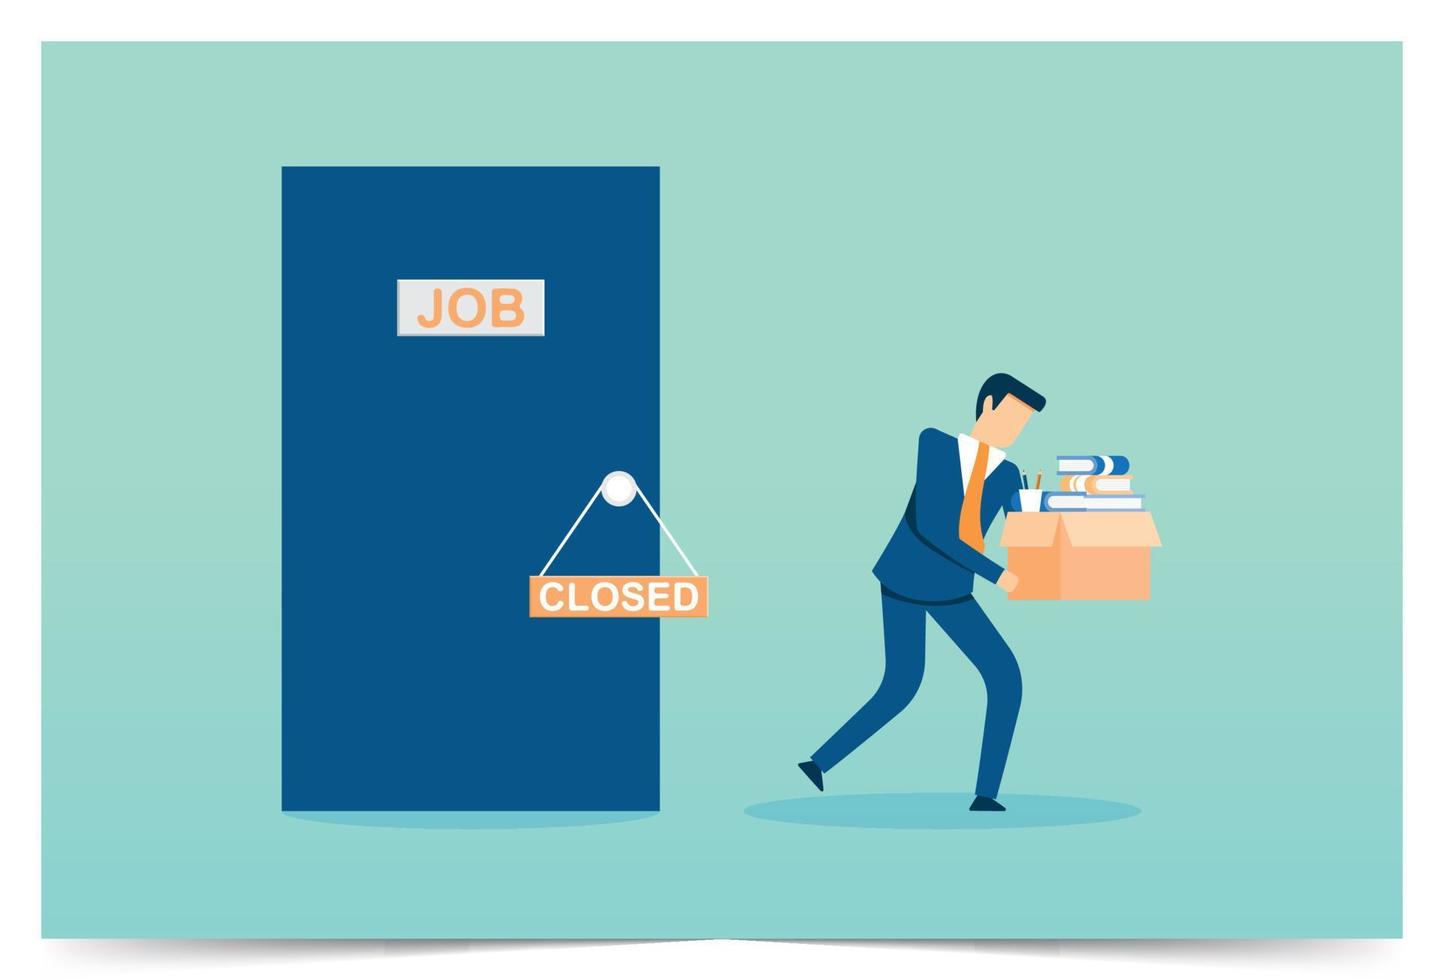 Job due to business closure vector